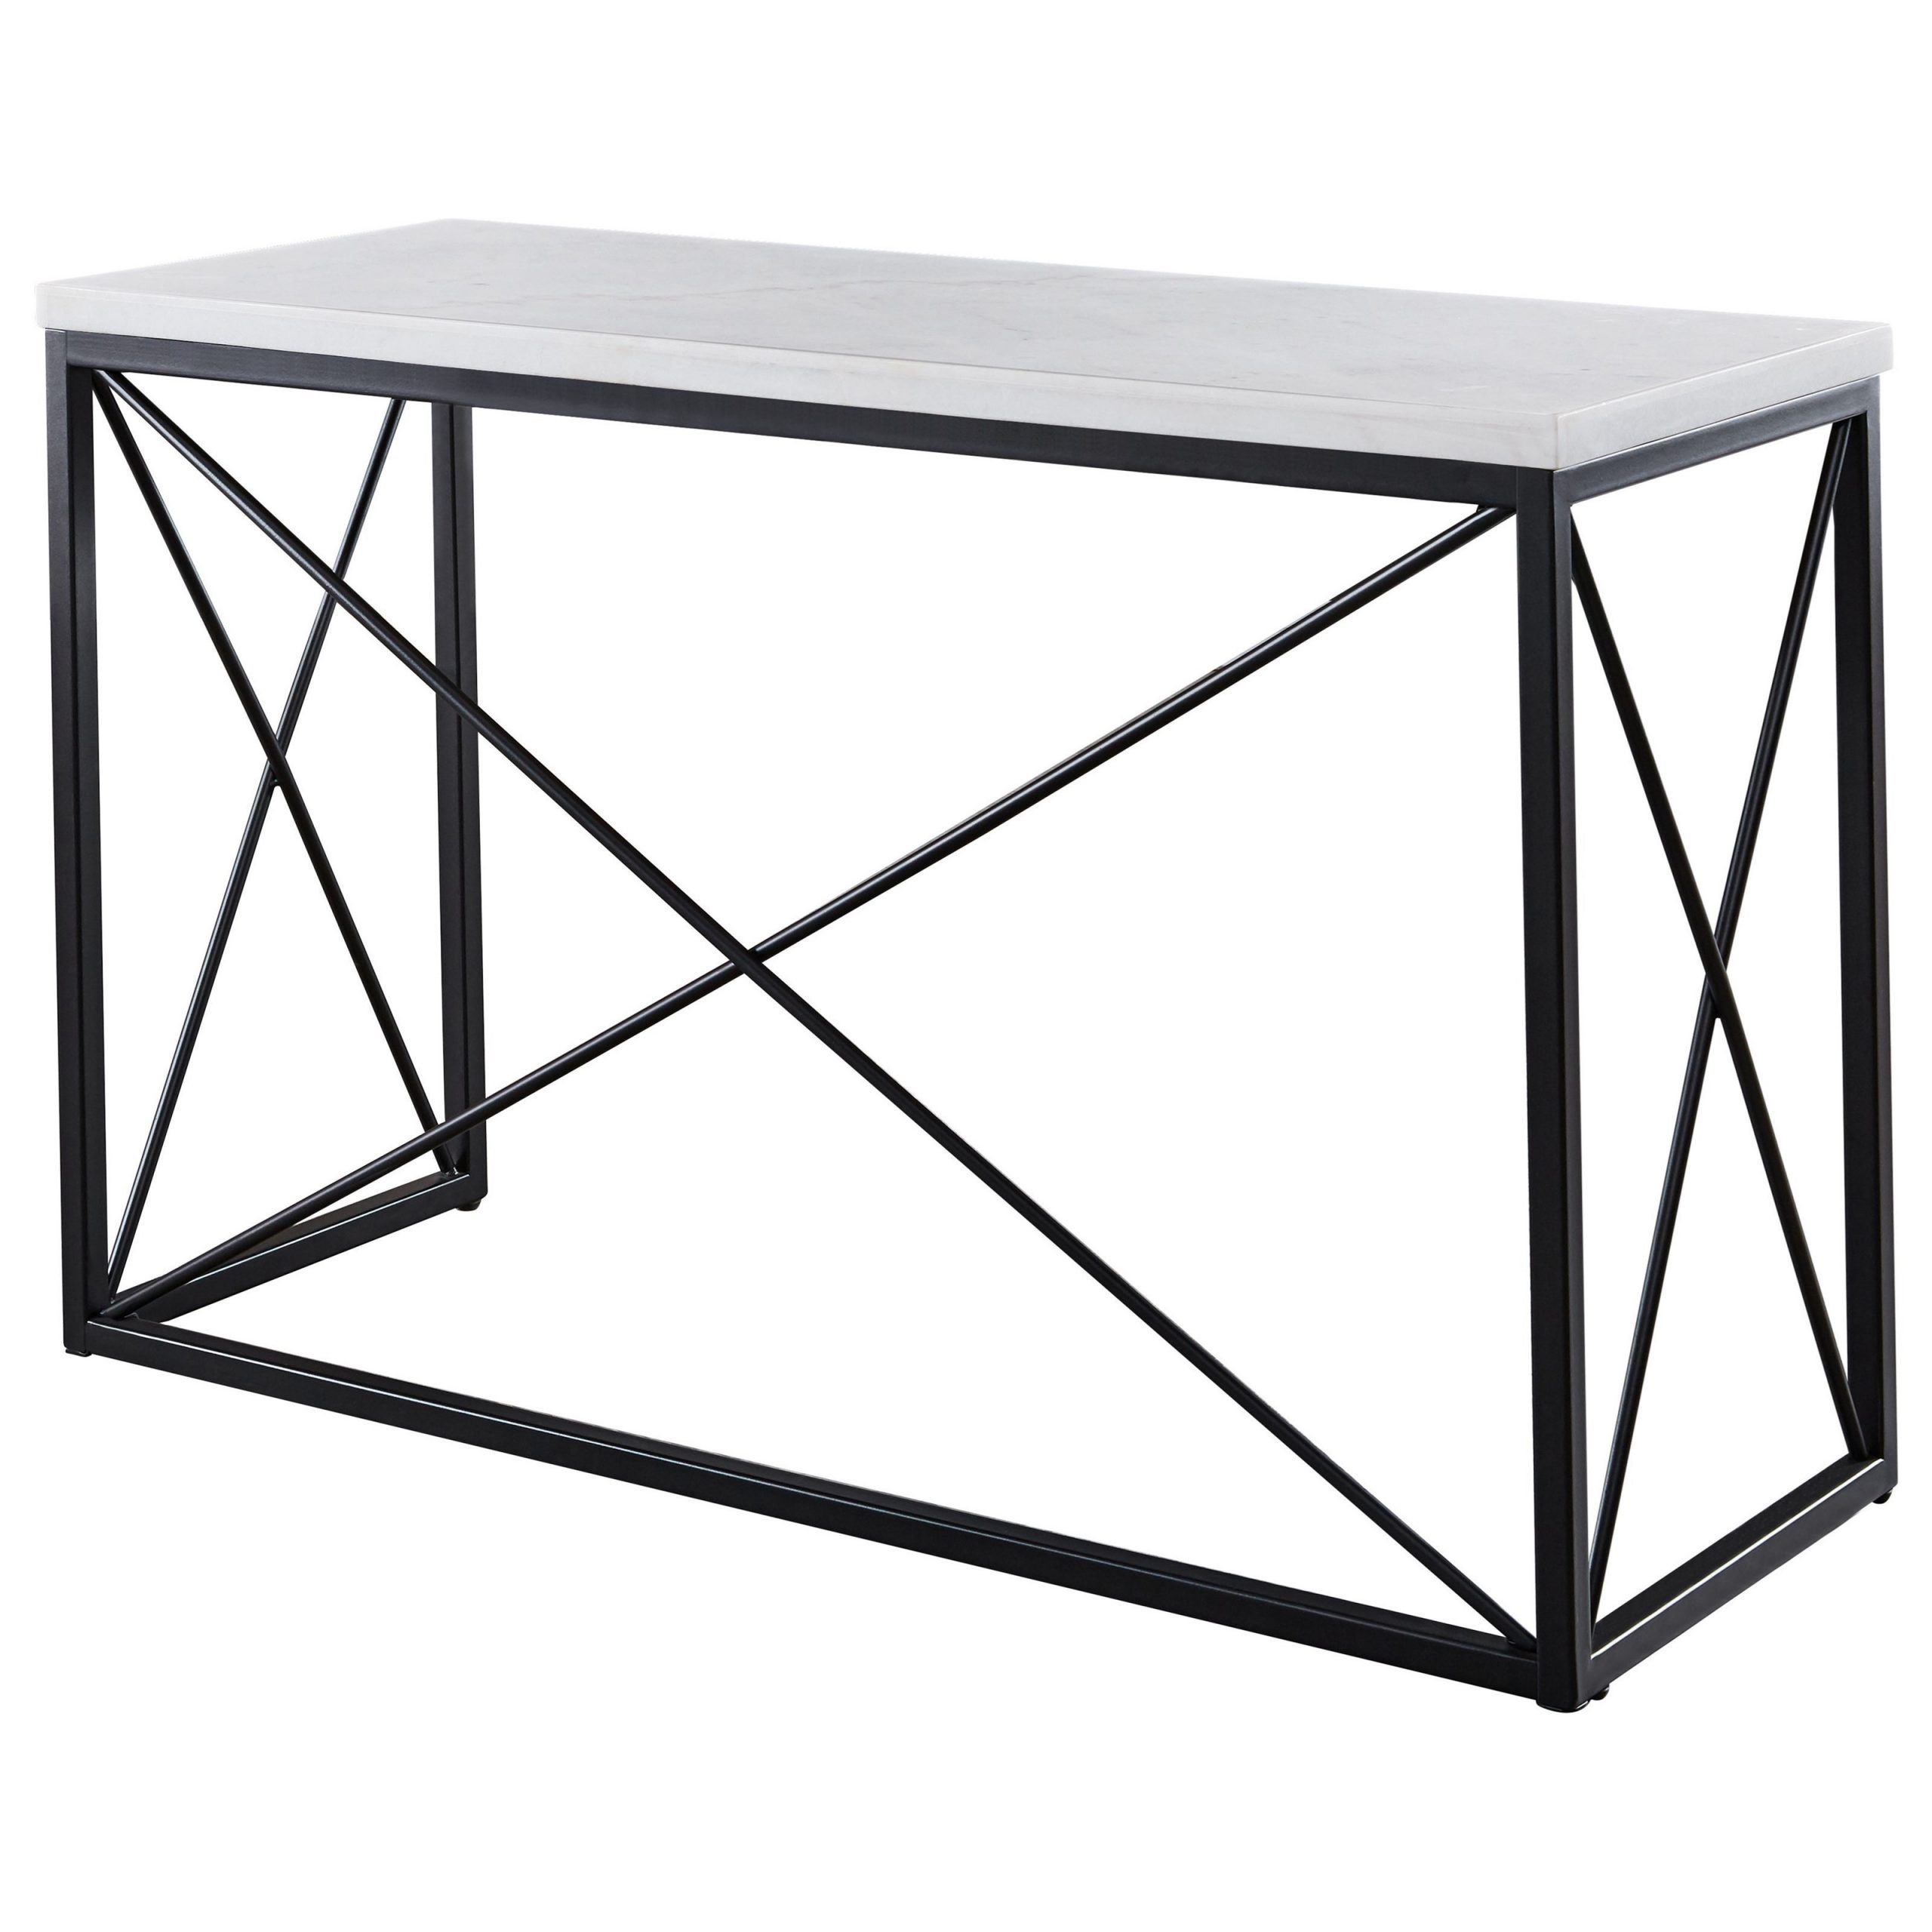 Steve Silver Skyler Contemporary White Marble Top Rectangular Sofa Intended For Silver Leaf Rectangle Console Tables (View 5 of 20)